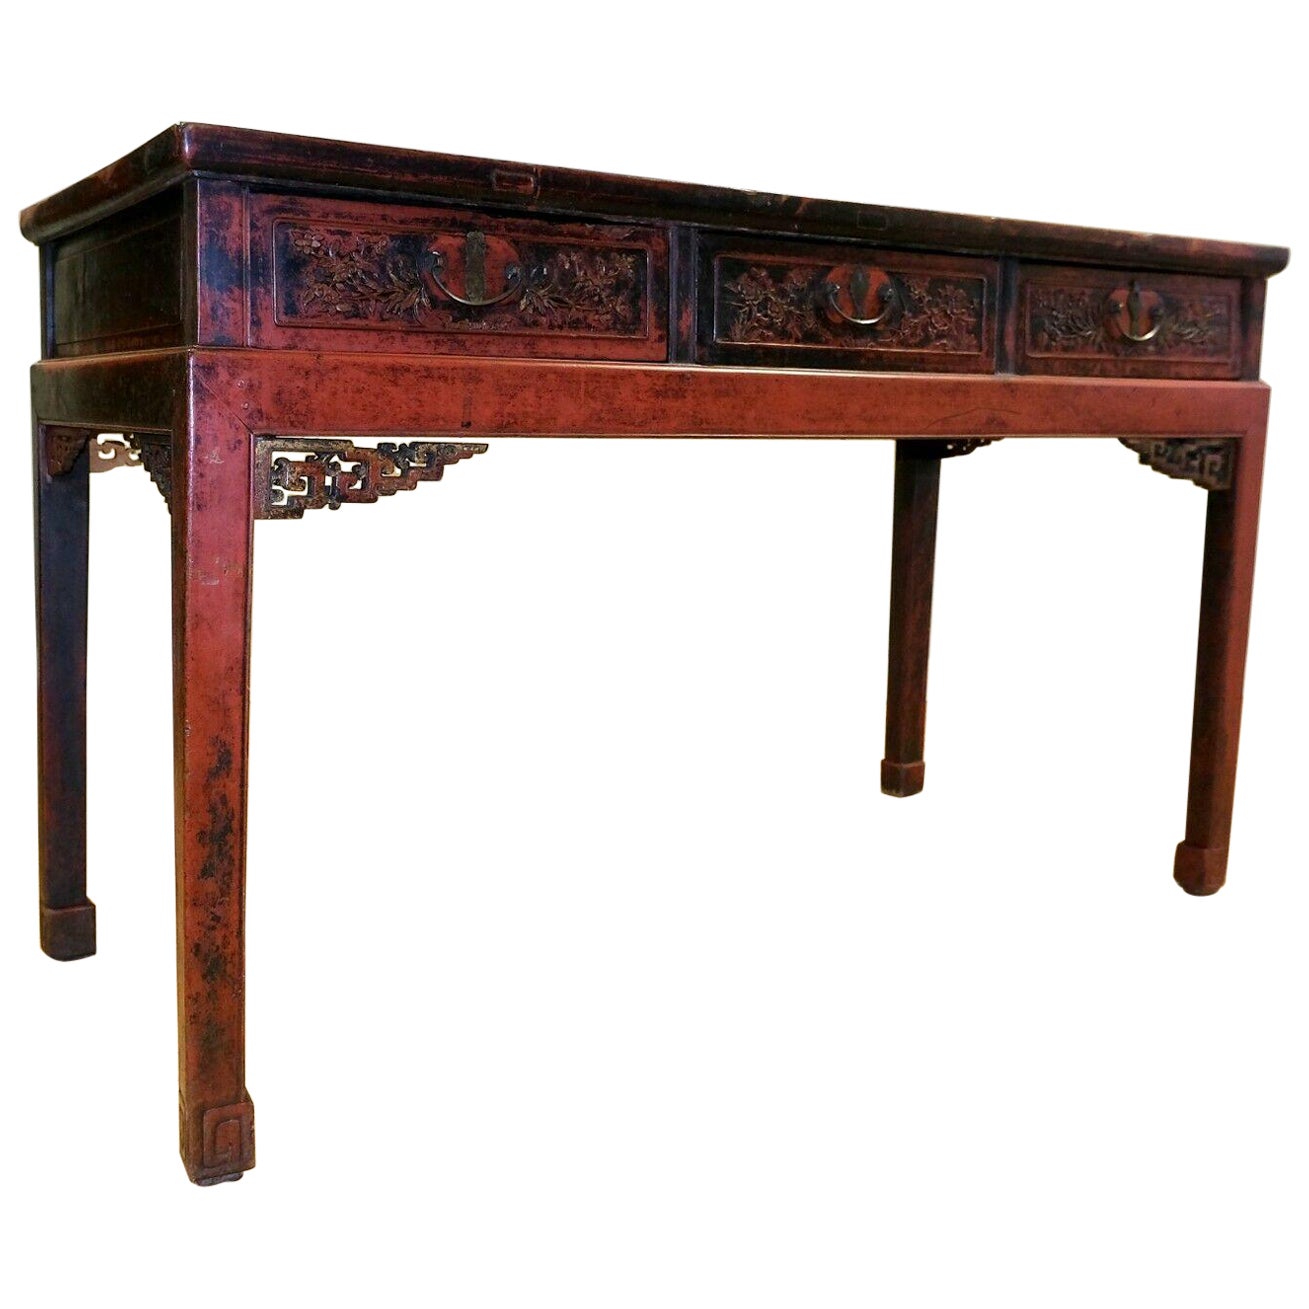 Late 19th C Red Lacquered Chinese Chippendale Console Table with Three Drawers